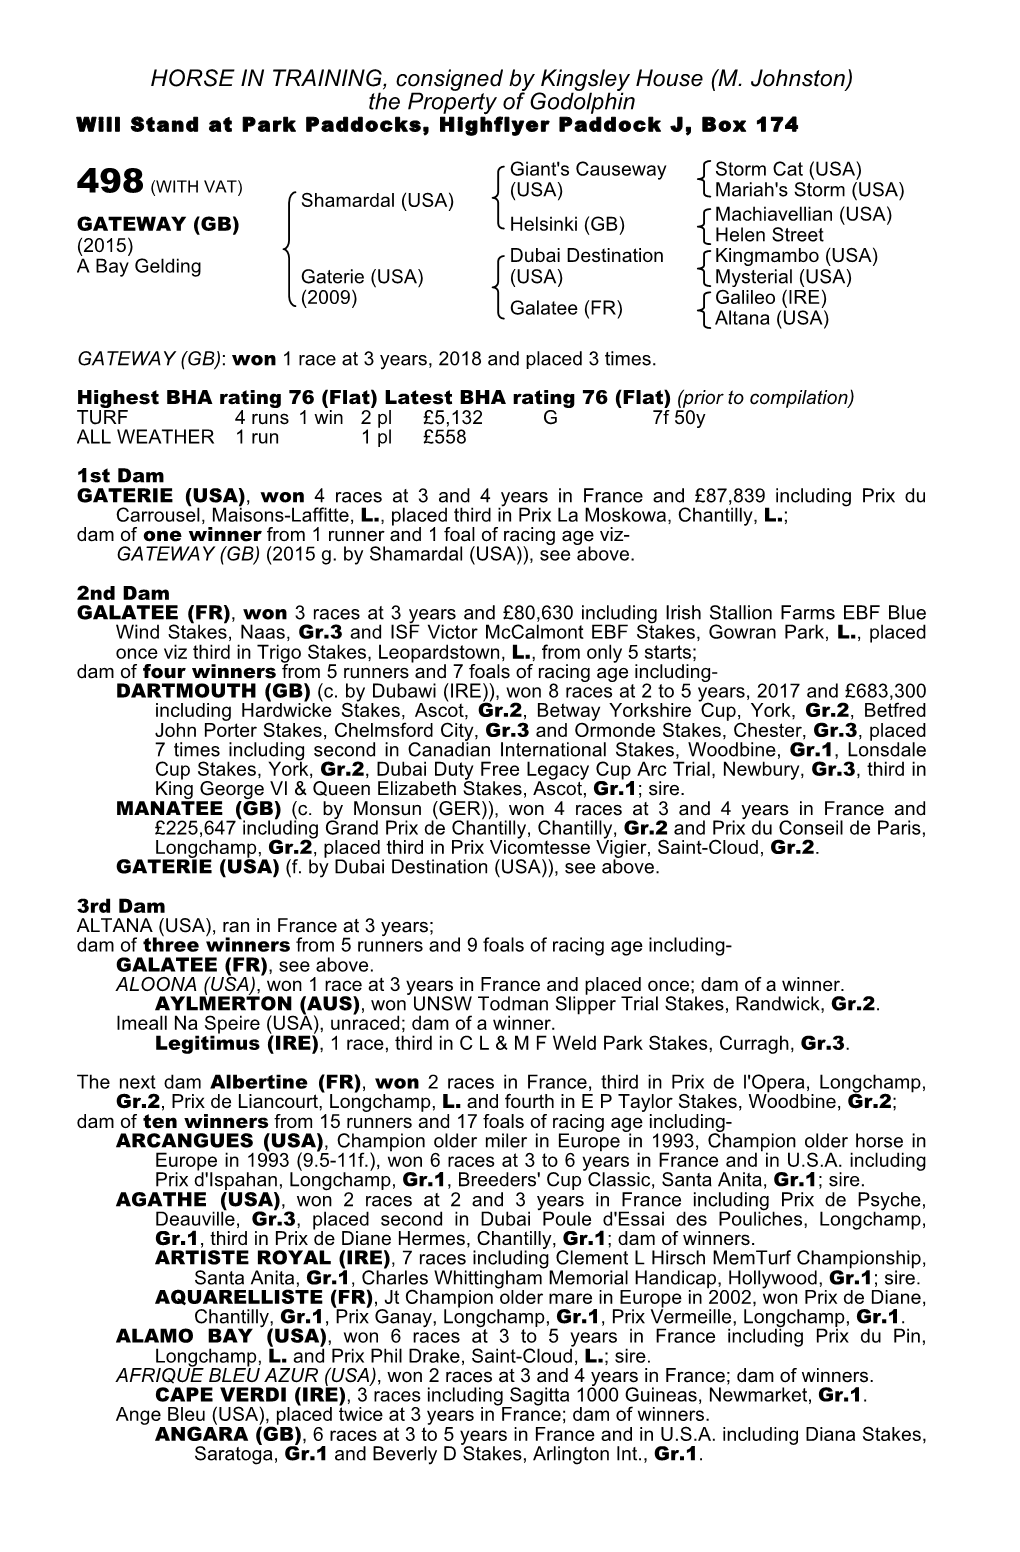 HORSE in TRAINING, Consigned by Kingsley House (M